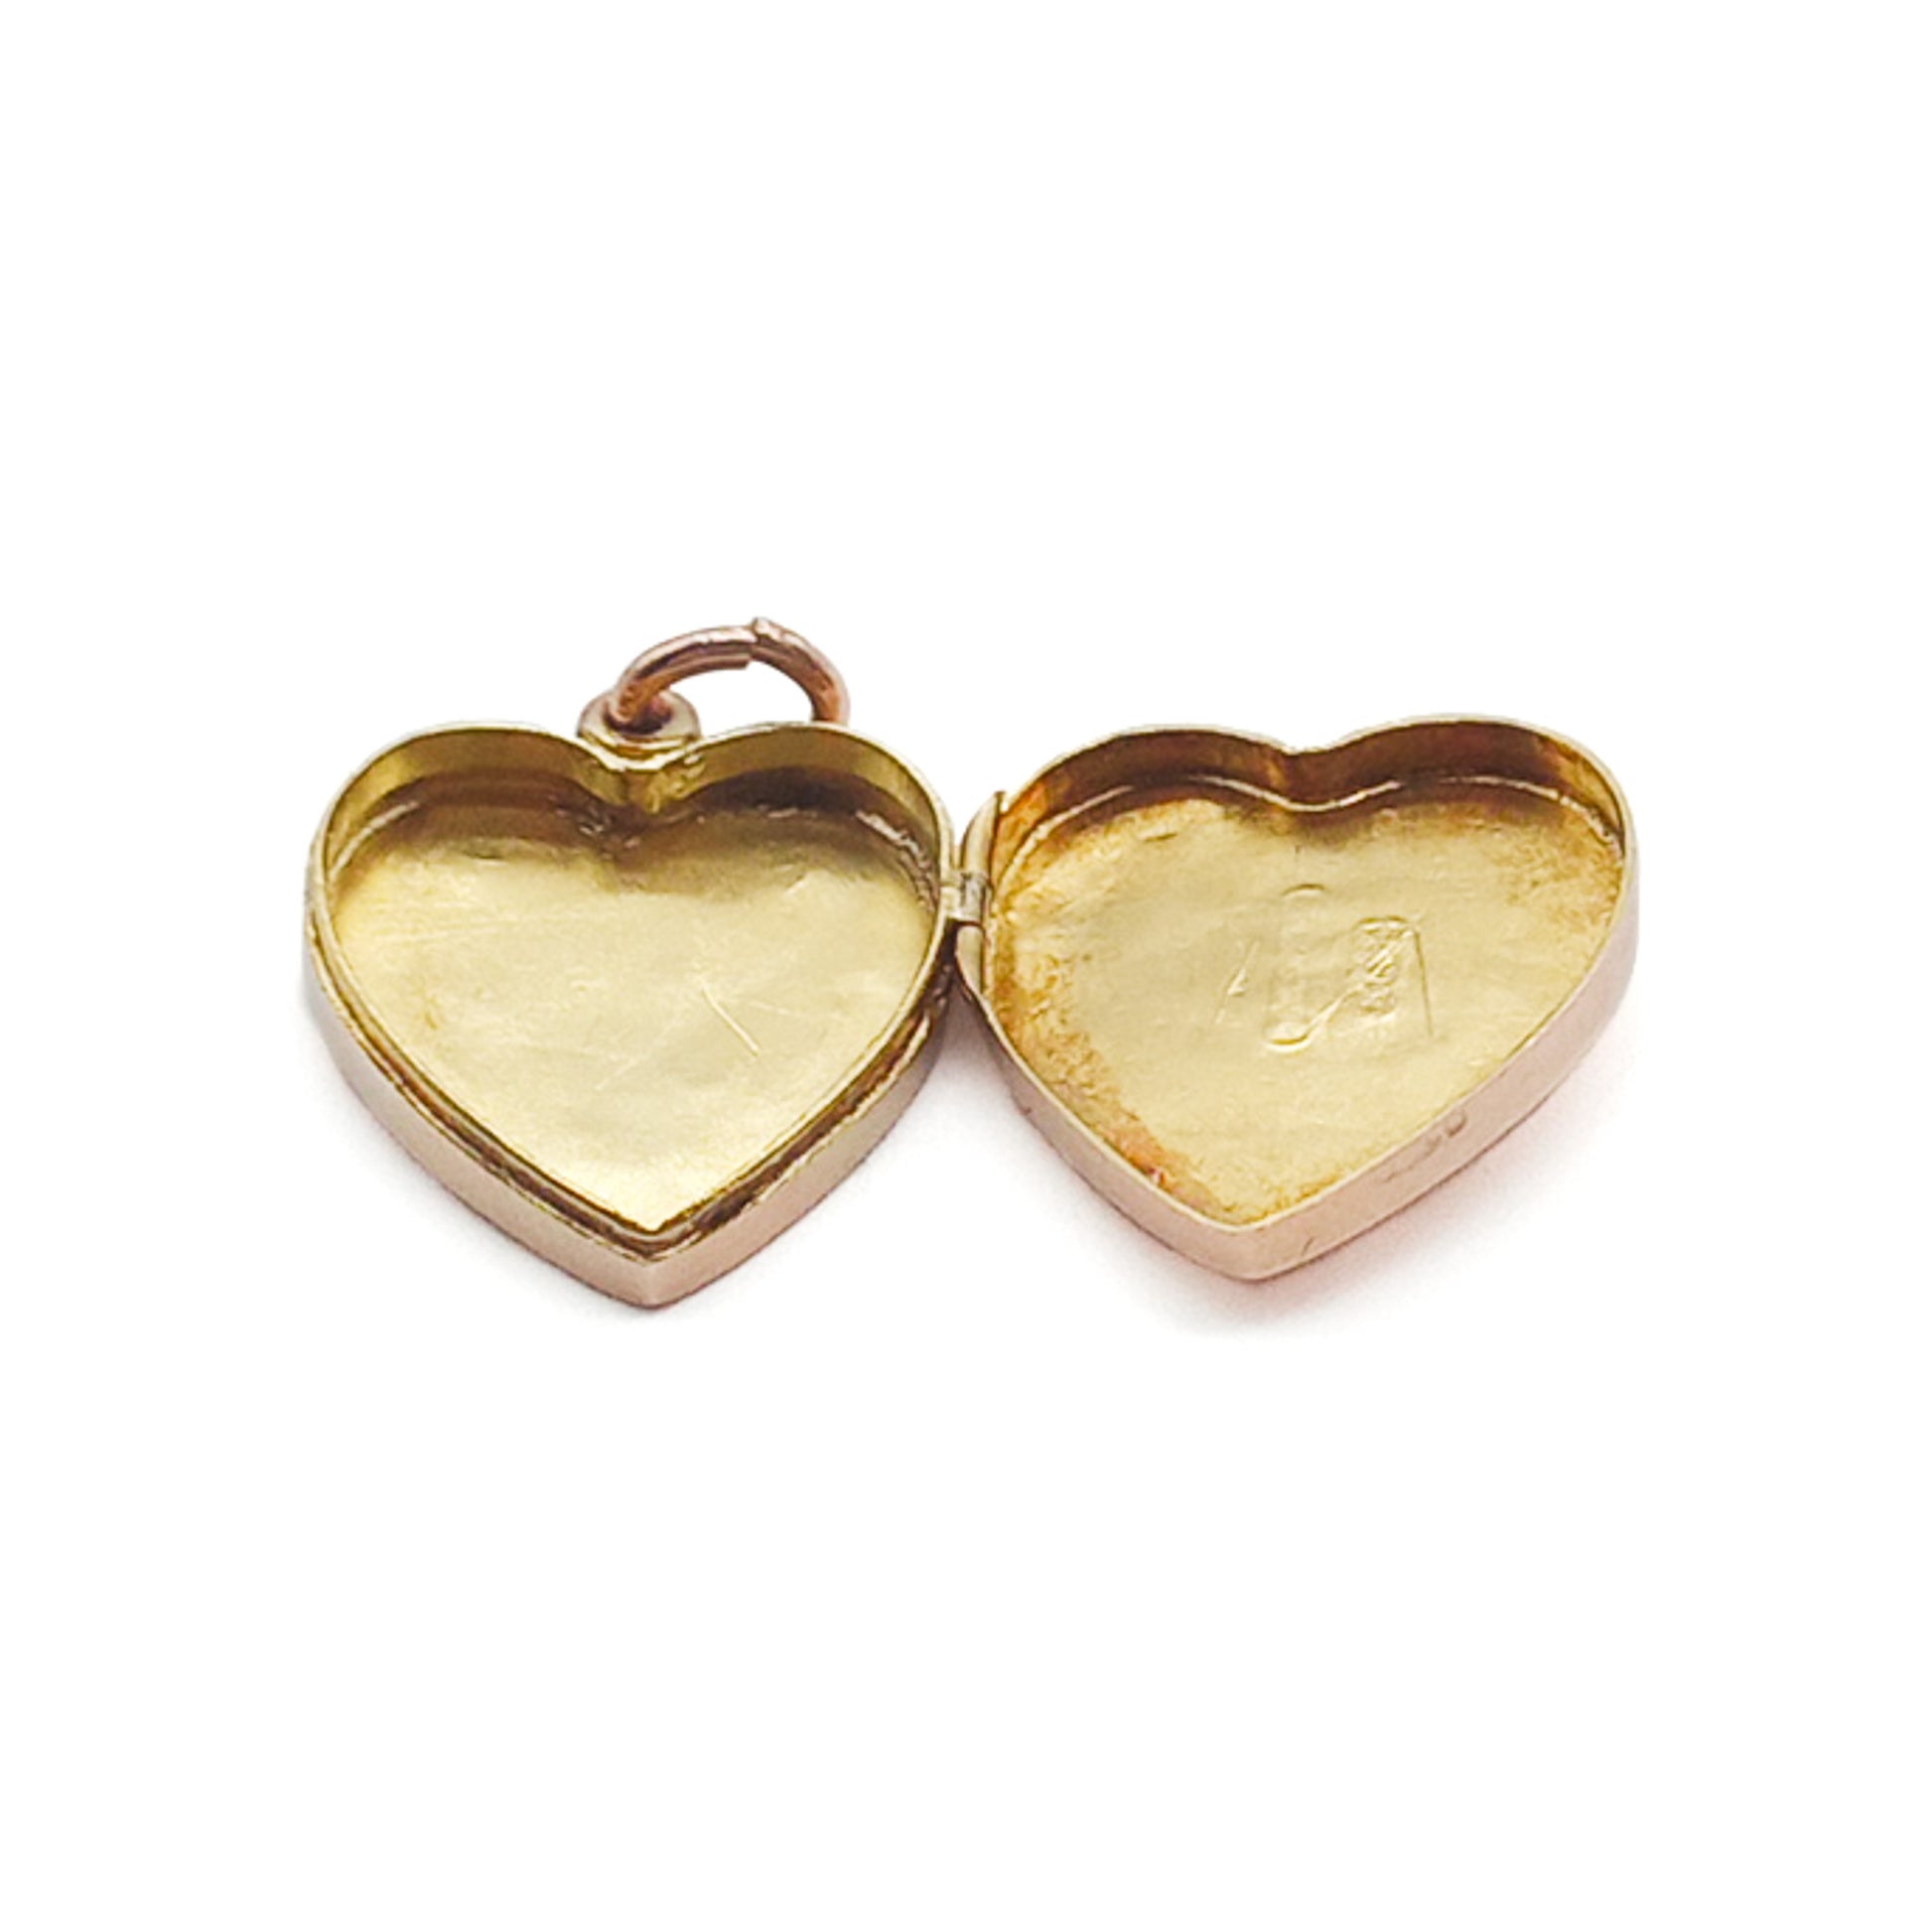 Lovely Victorian 9ct rose gold heart locket with a horseshoe design on the front.